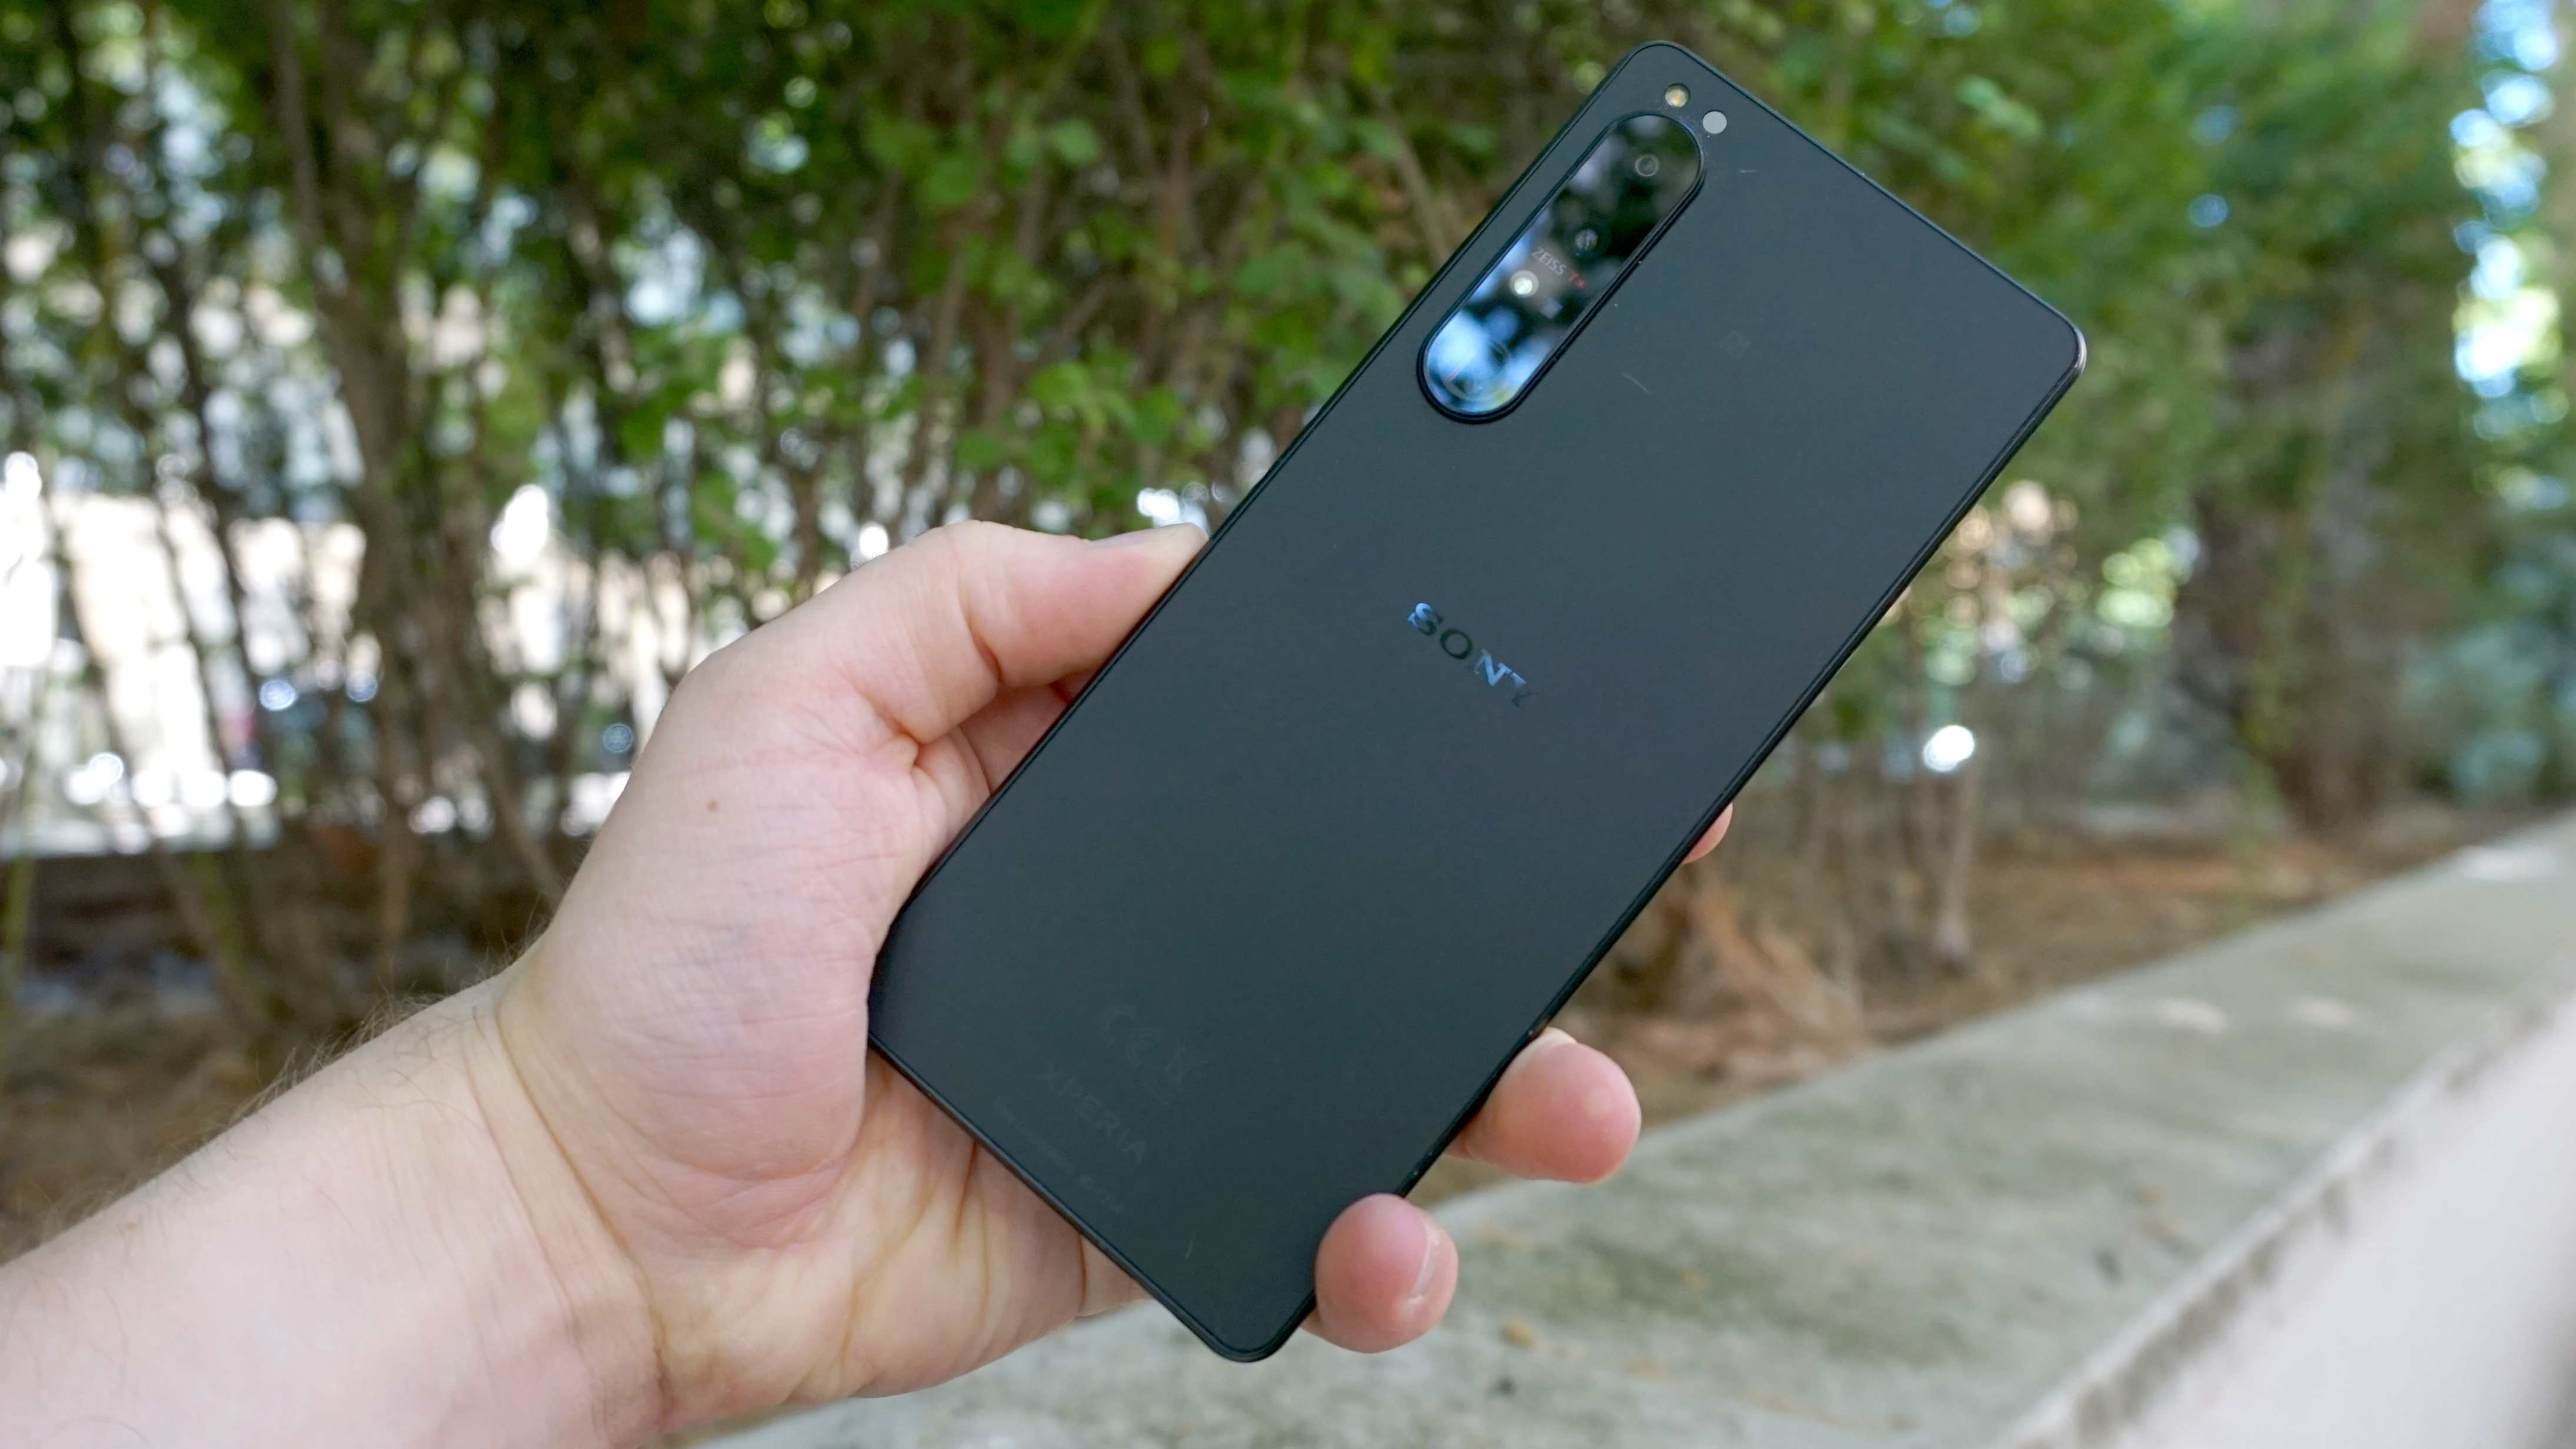 Sony Xperia 1 IV from behind, in someone's hand